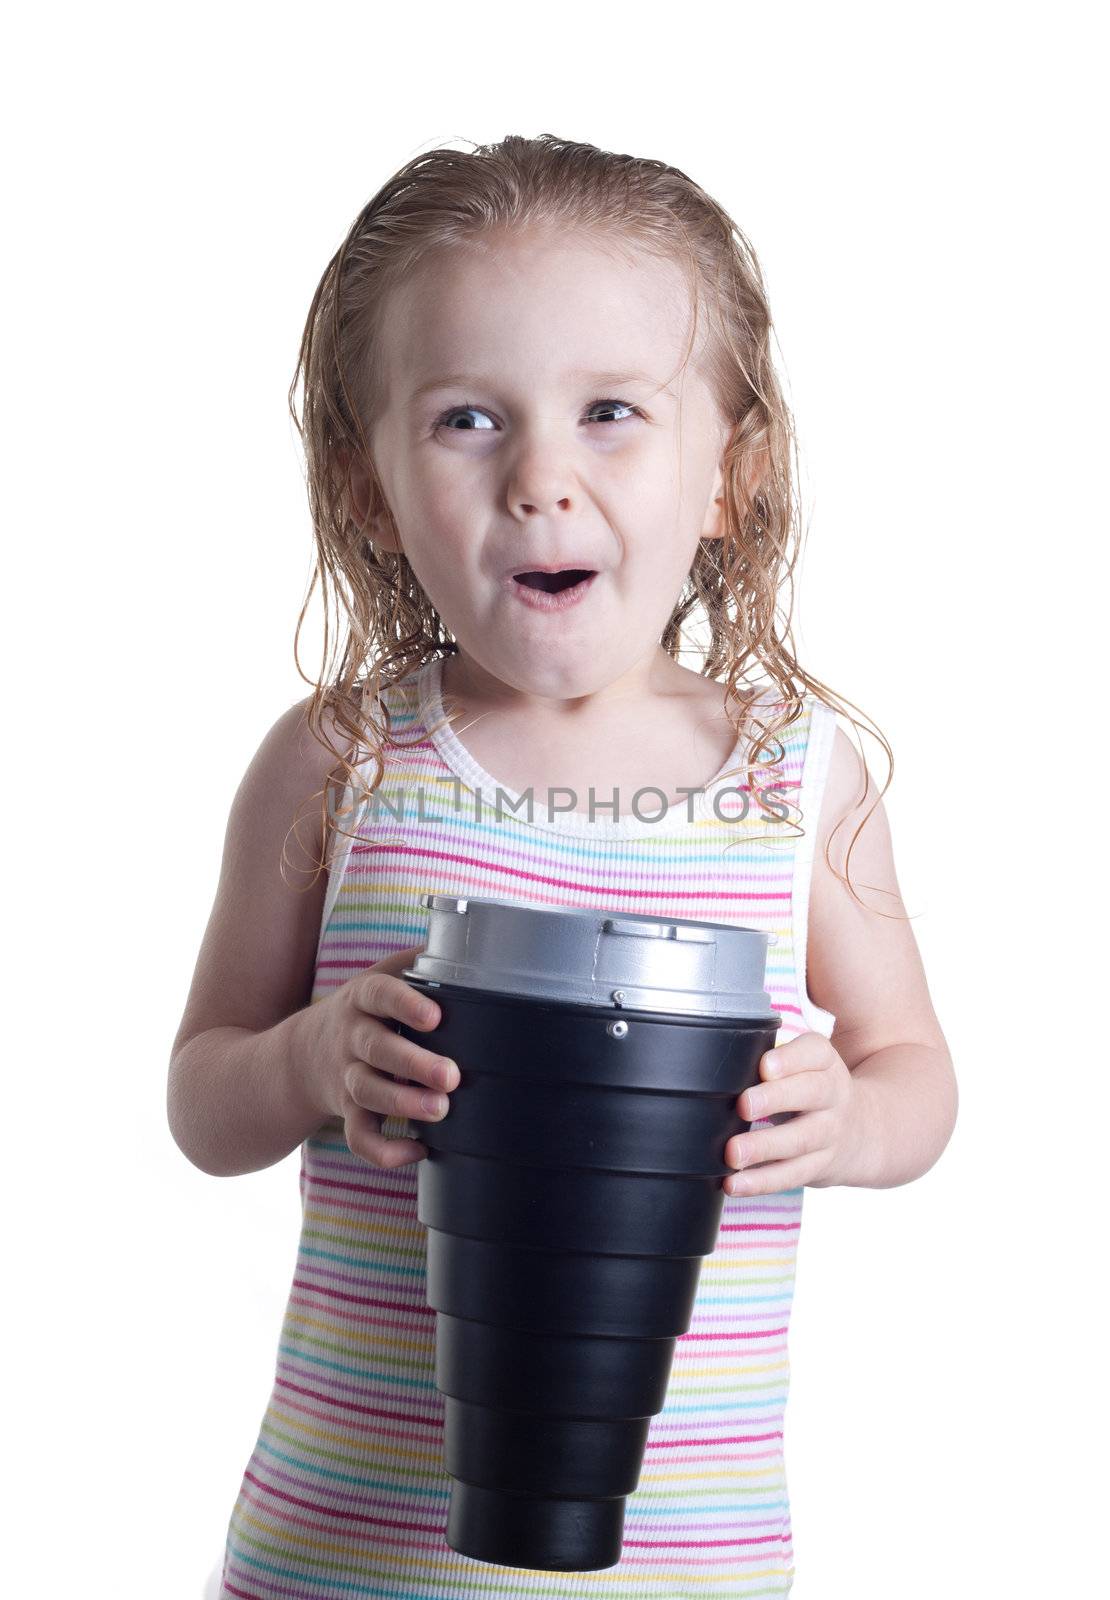 A girl is overjoyed by what is inside the cone she is holding.  The cone can be replaced by any object.